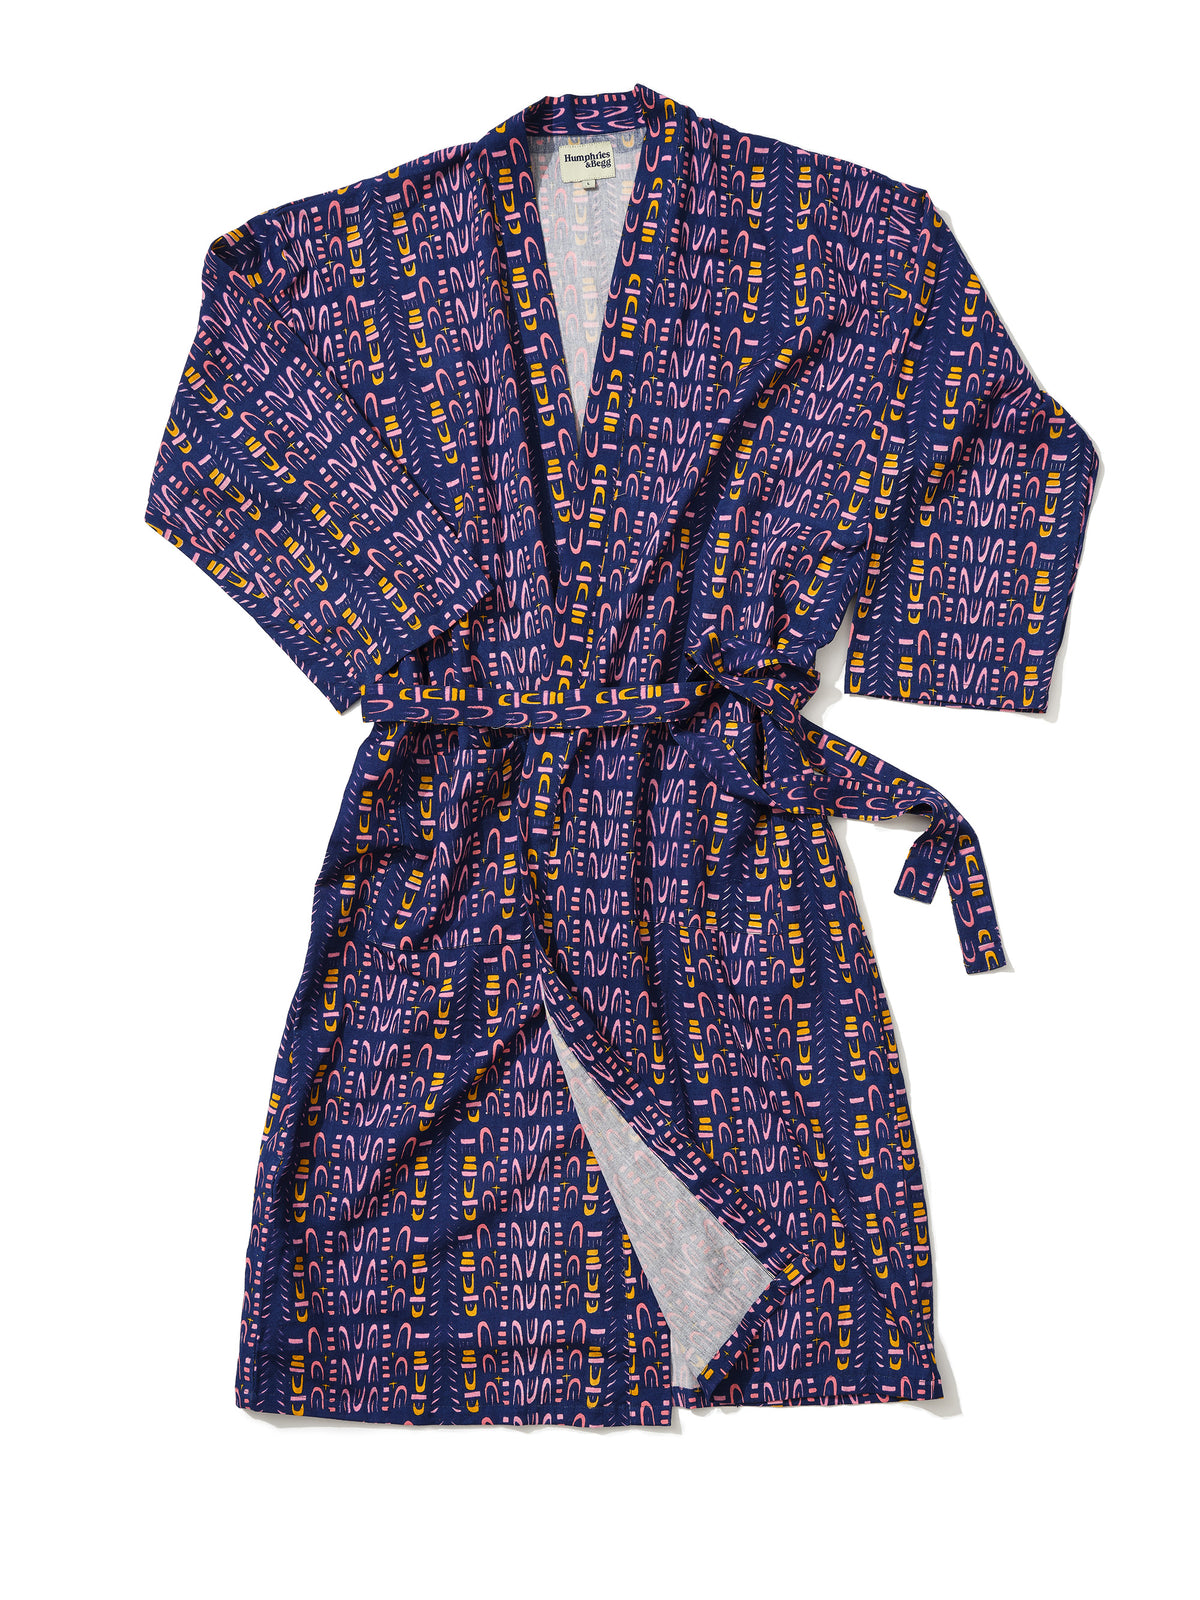 Cotton Robe in 'Navy Skydive'